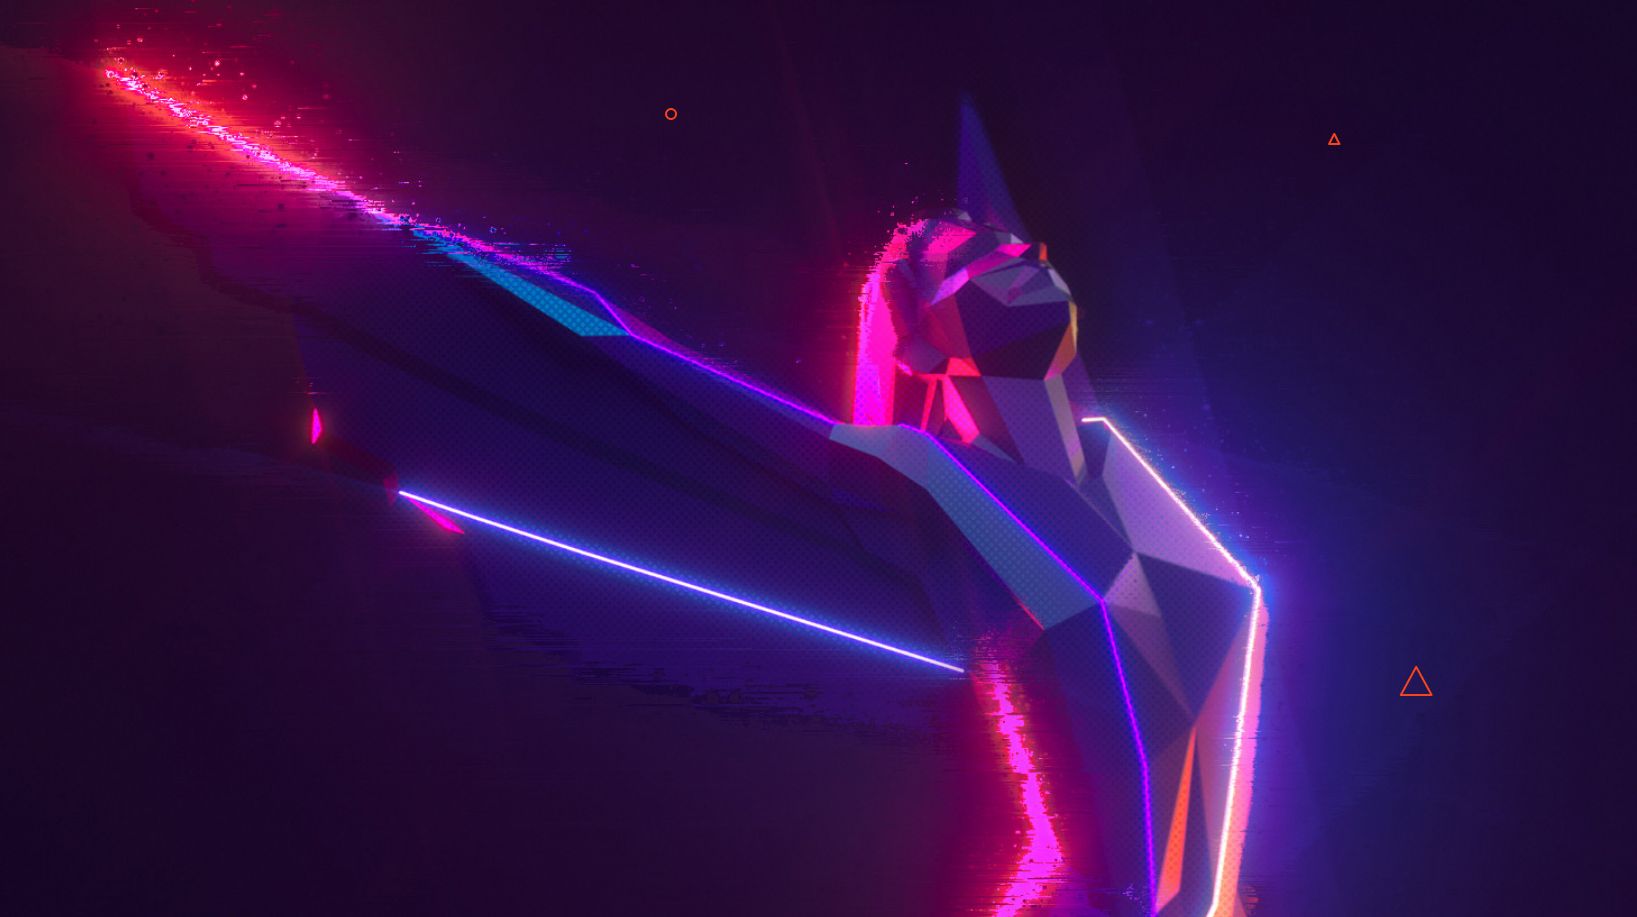 Image for The Game Awards 2019 will feature around "10 new game" announcements